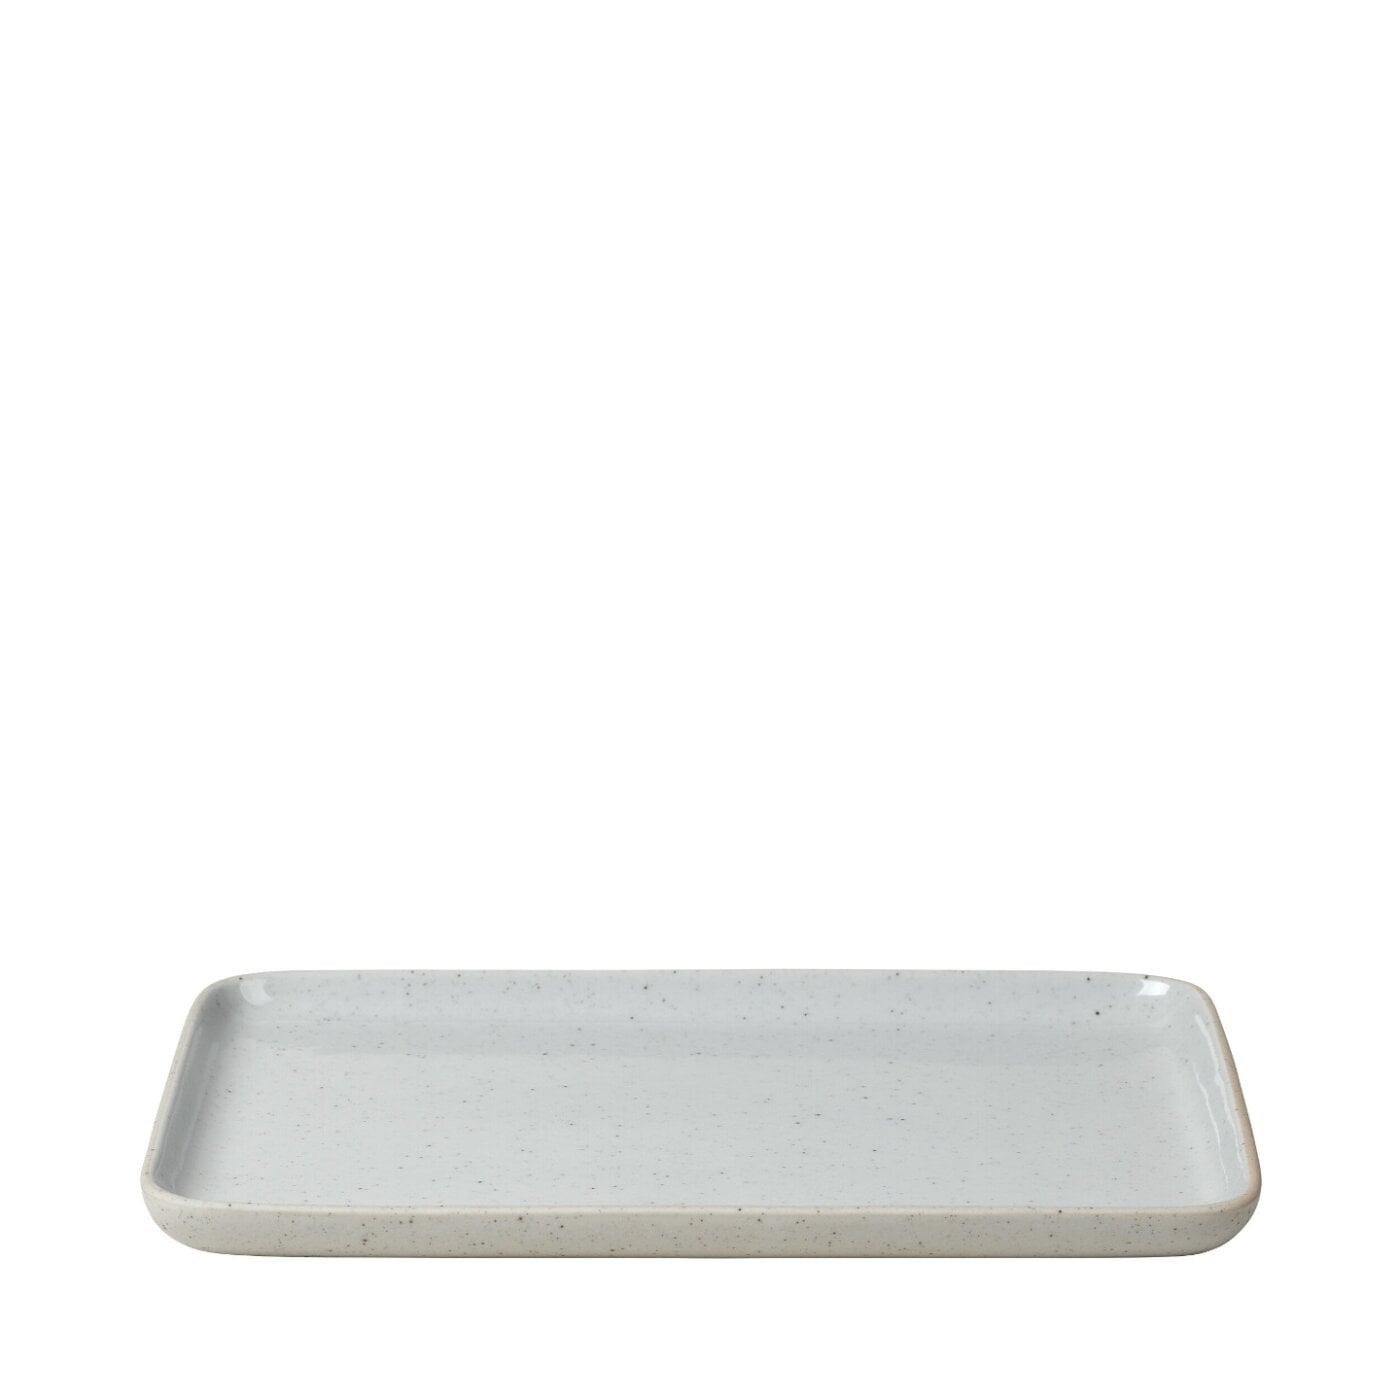 SABLO Snack Plate Large 150 x 210 mm / 5.9 x 8.3 in